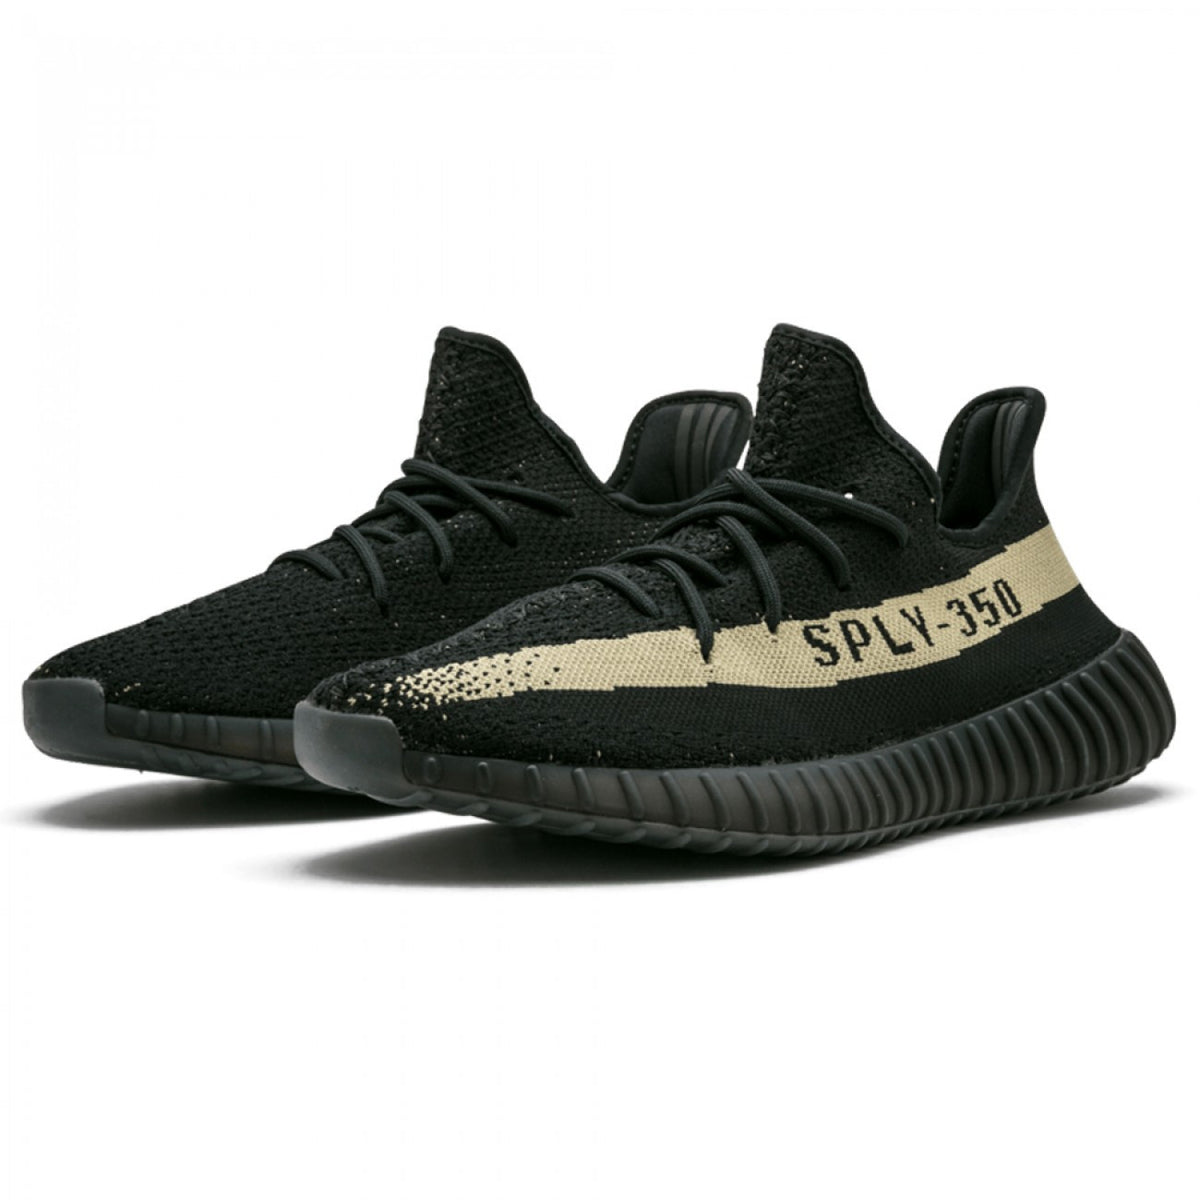 Adidas Yeezy Boost 350 V2 Olive Green – Soldsoles